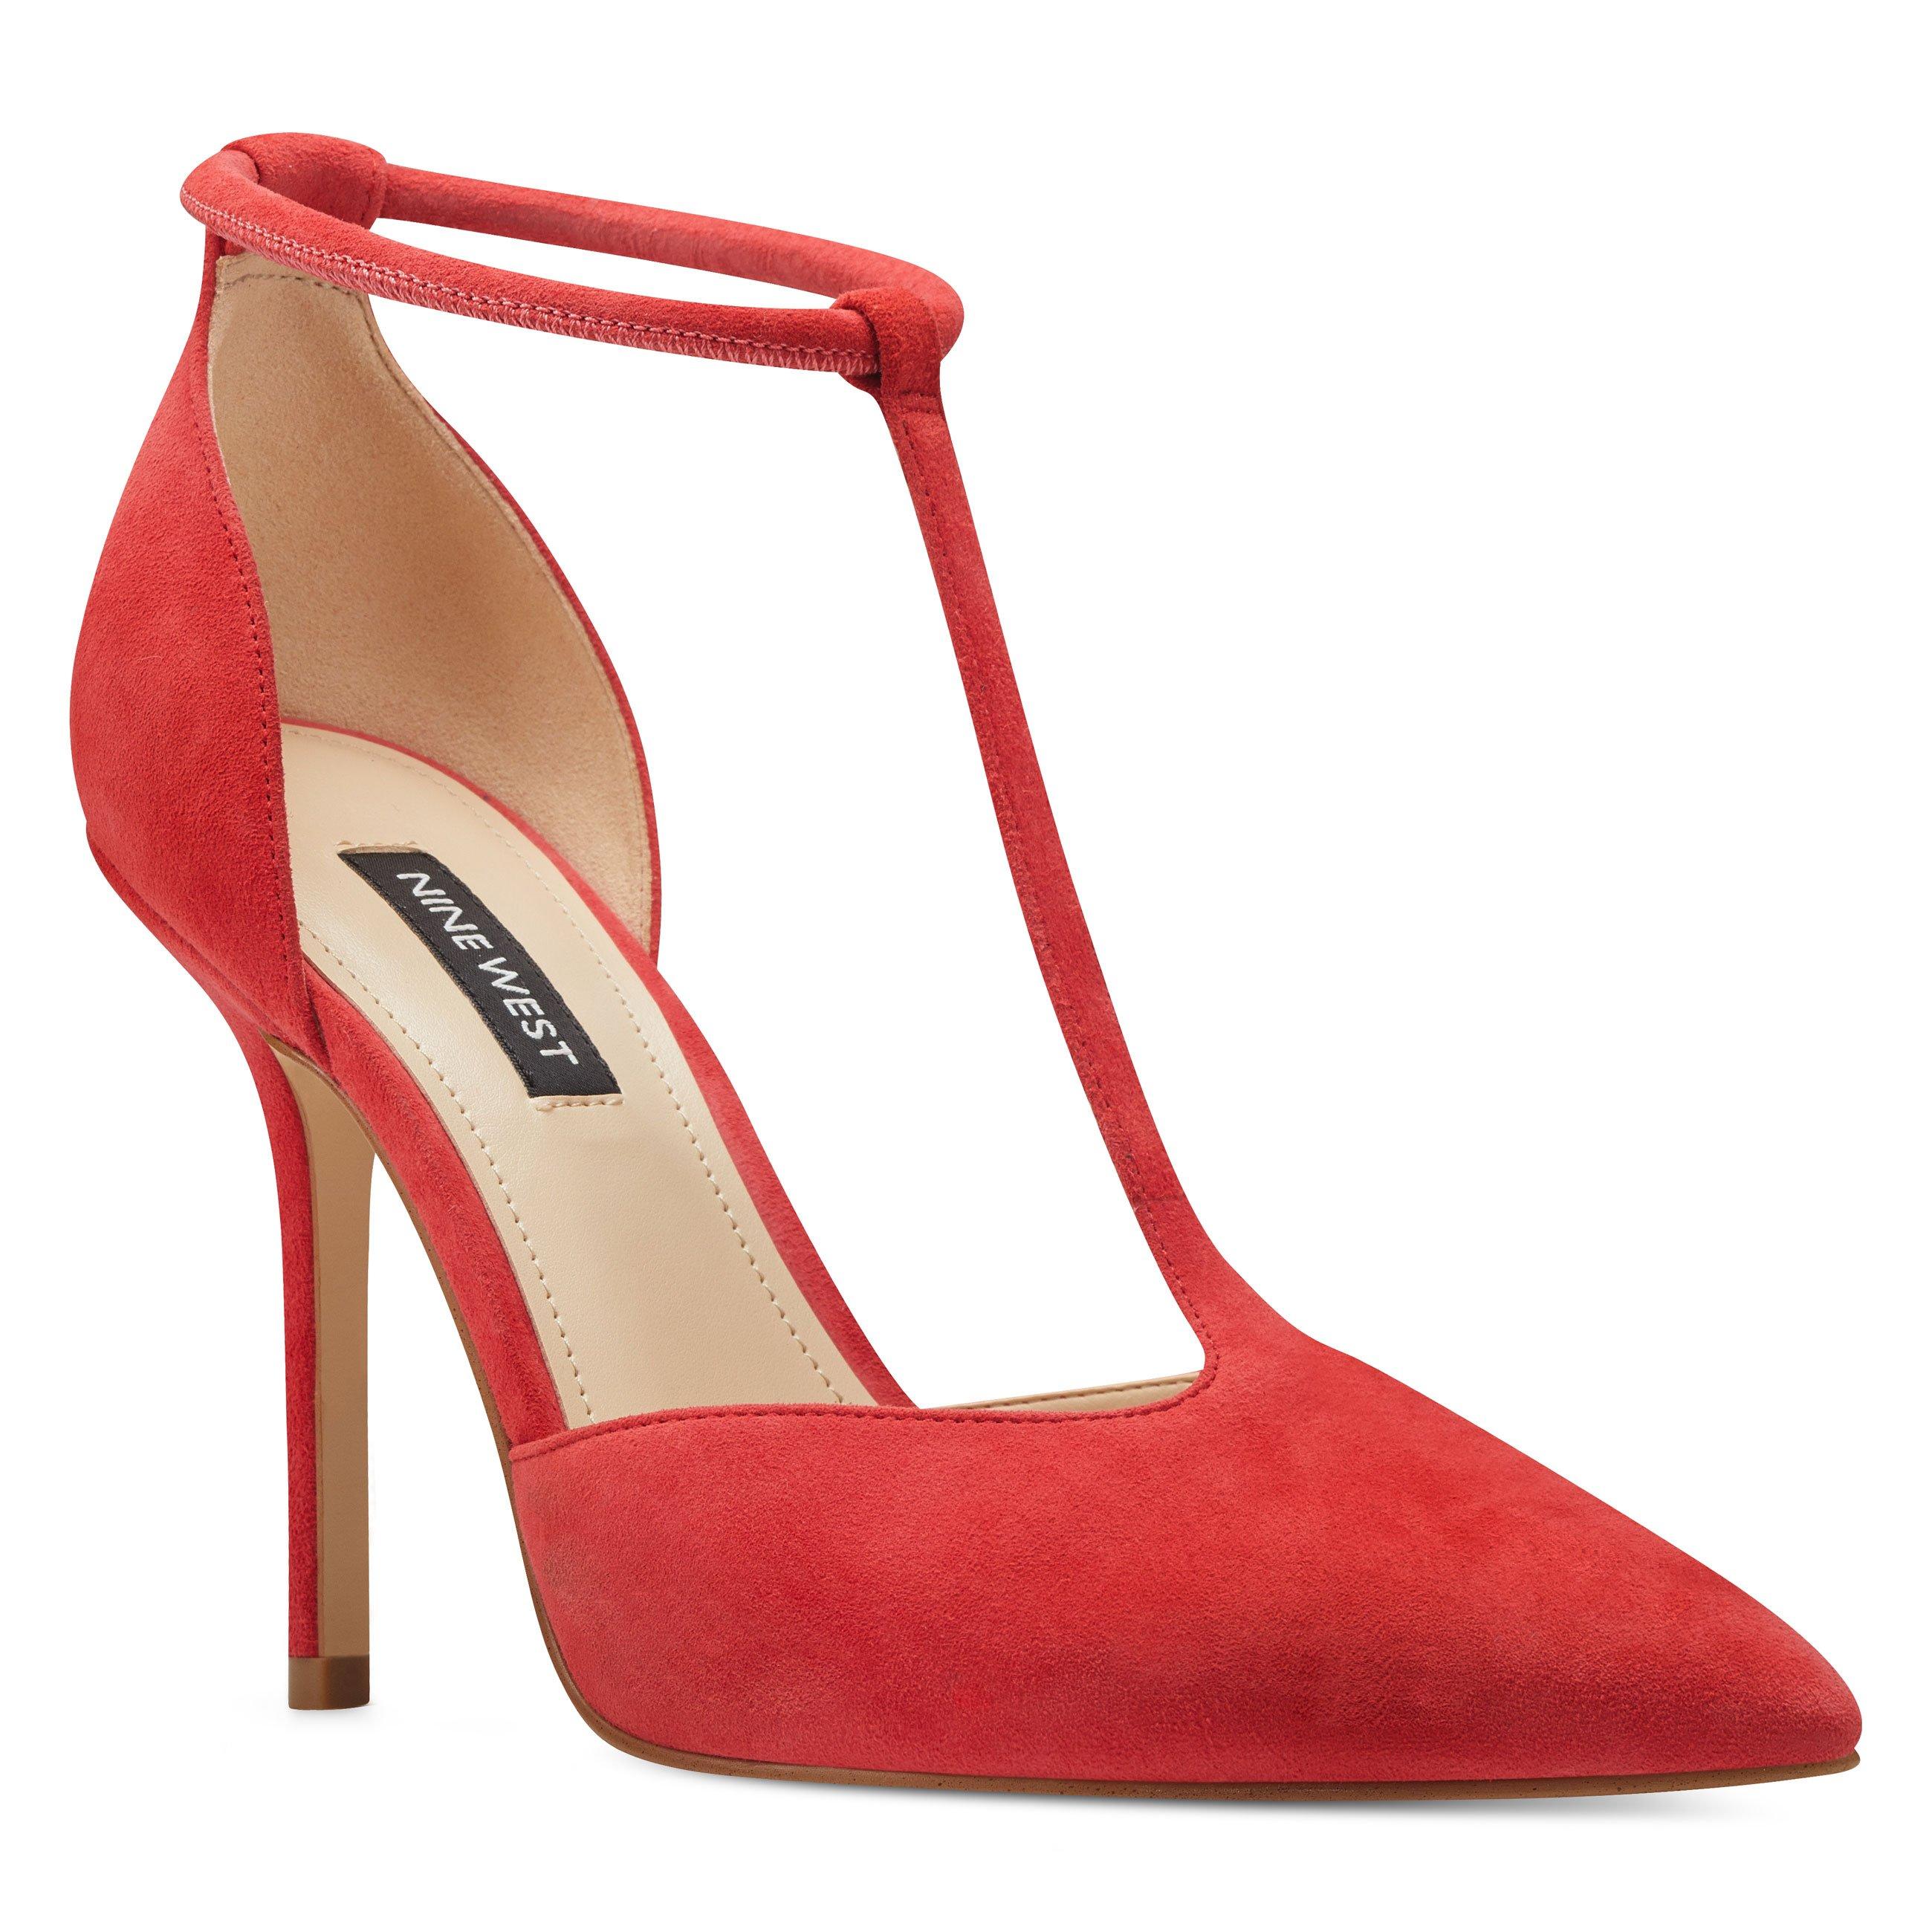 Nine West Breezy Strappy Pumps in Red - Lyst